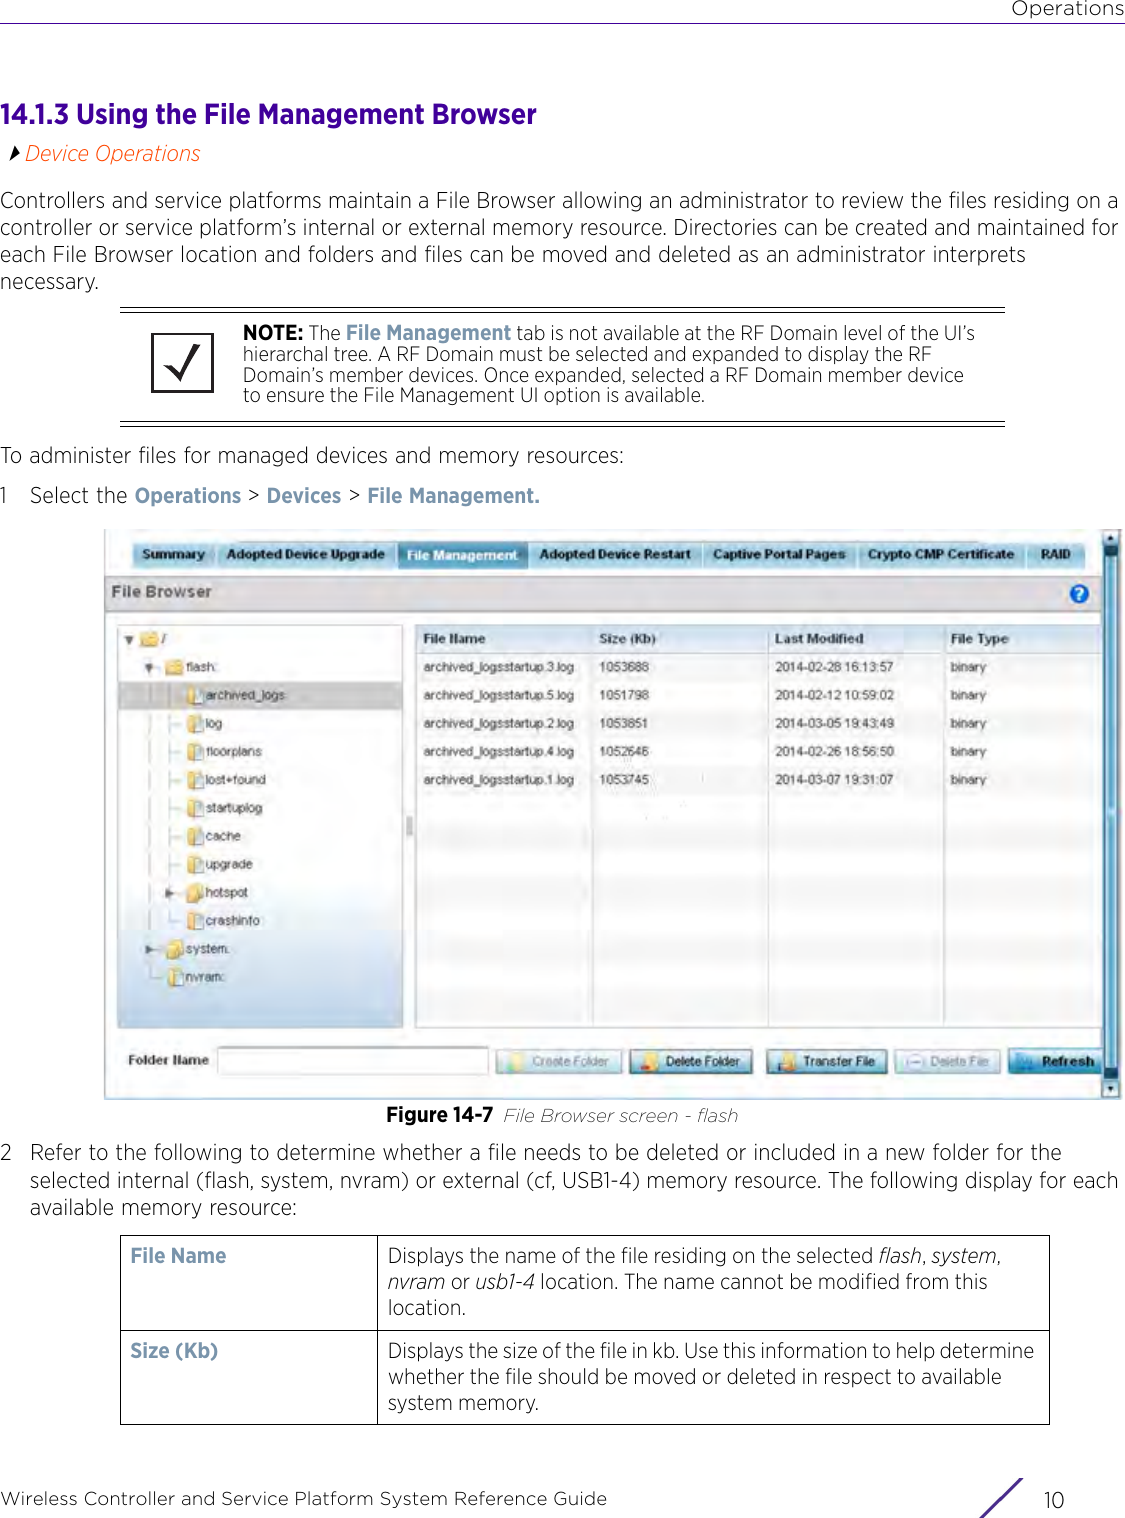 OperationsWireless Controller and Service Platform System Reference Guide  1014.1.3 Using the File Management BrowserDevice OperationsControllers and service platforms maintain a File Browser allowing an administrator to review the files residing on a controller or service platform’s internal or external memory resource. Directories can be created and maintained for each File Browser location and folders and files can be moved and deleted as an administrator interprets necessary. To administer files for managed devices and memory resources:1 Select the Operations &gt; Devices &gt; File Management.Figure 14-7 File Browser screen - flash2 Refer to the following to determine whether a file needs to be deleted or included in a new folder for the selected internal (flash, system, nvram) or external (cf, USB1-4) memory resource. The following display for each available memory resource:NOTE: The File Management tab is not available at the RF Domain level of the UI’s hierarchal tree. A RF Domain must be selected and expanded to display the RF Domain’s member devices. Once expanded, selected a RF Domain member device to ensure the File Management UI option is available.File Name Displays the name of the file residing on the selected flash, system, nvram or usb1-4 location. The name cannot be modified from this location.Size (Kb) Displays the size of the file in kb. Use this information to help determine whether the file should be moved or deleted in respect to available system memory.